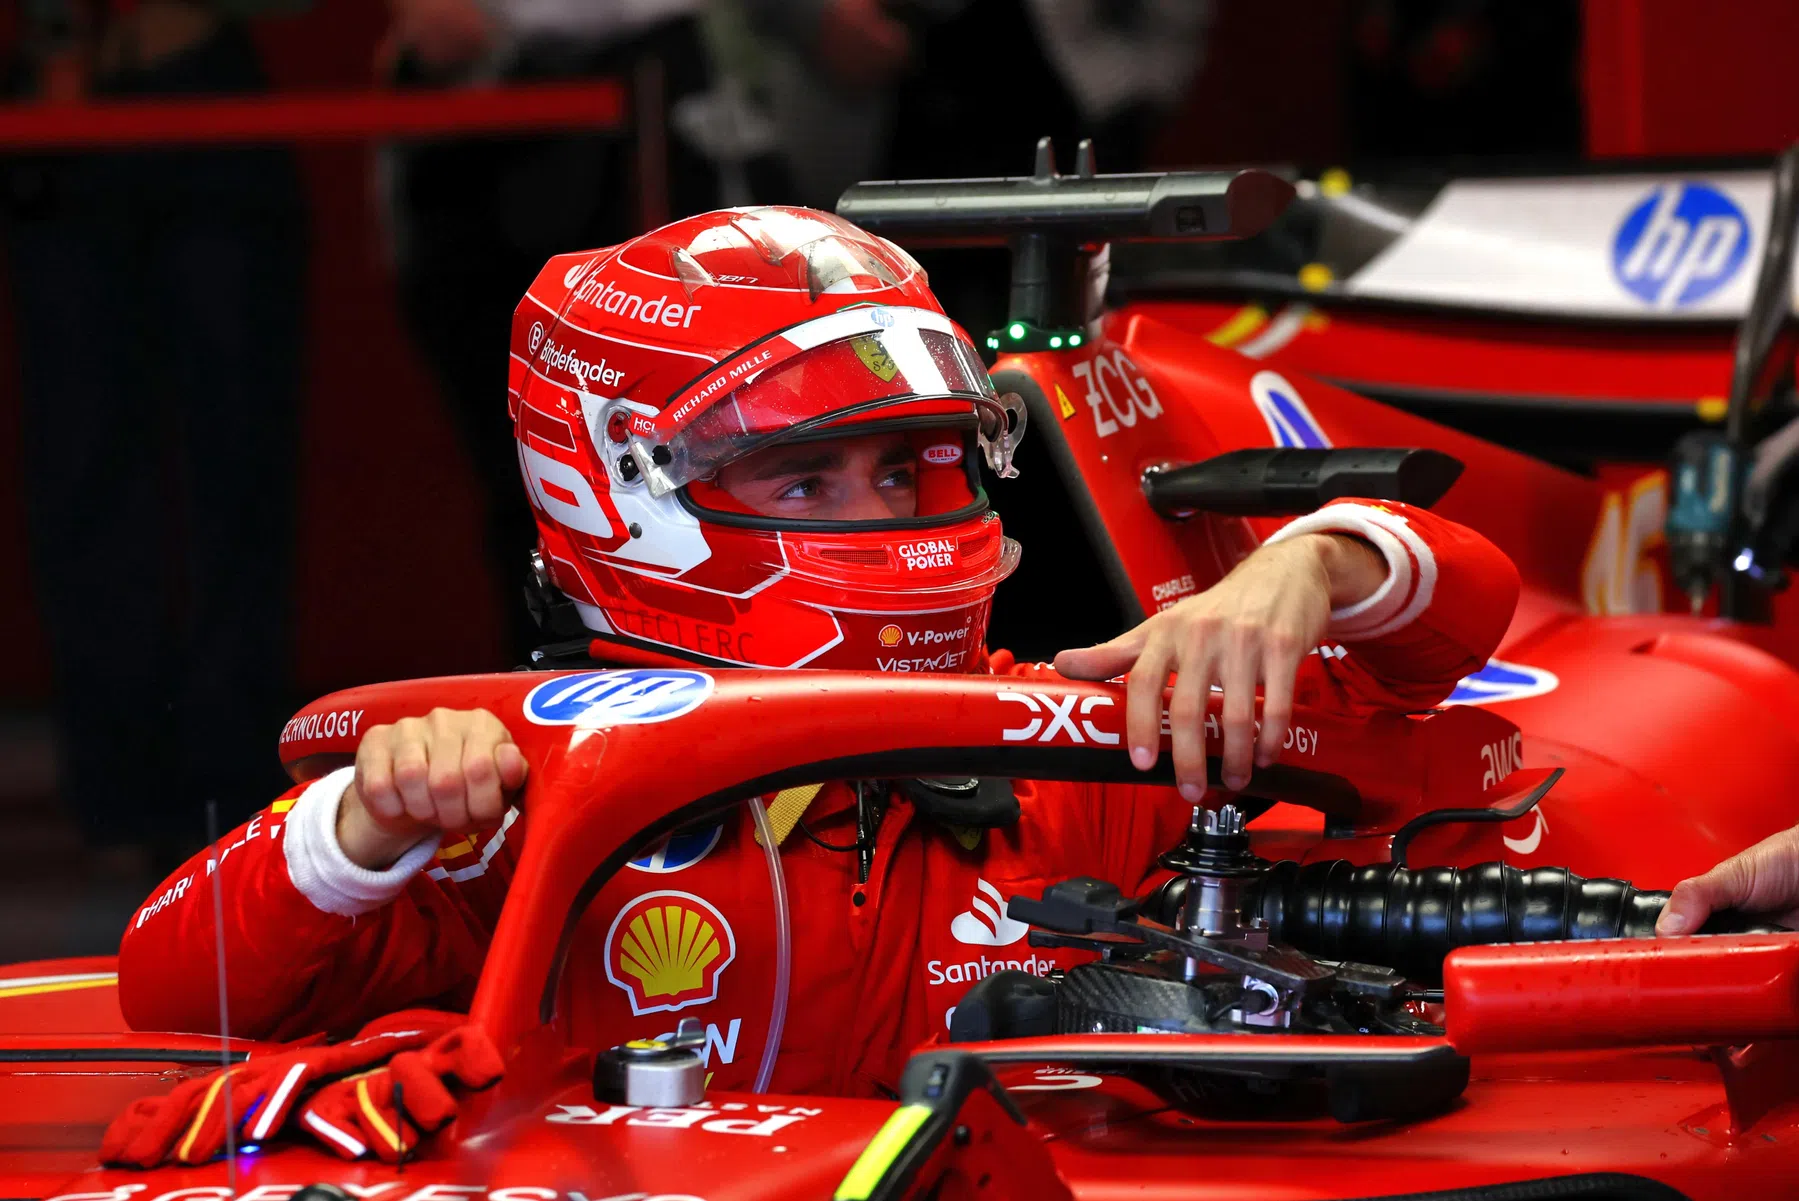 This is the punishment for Ferrari after blunder in Canada